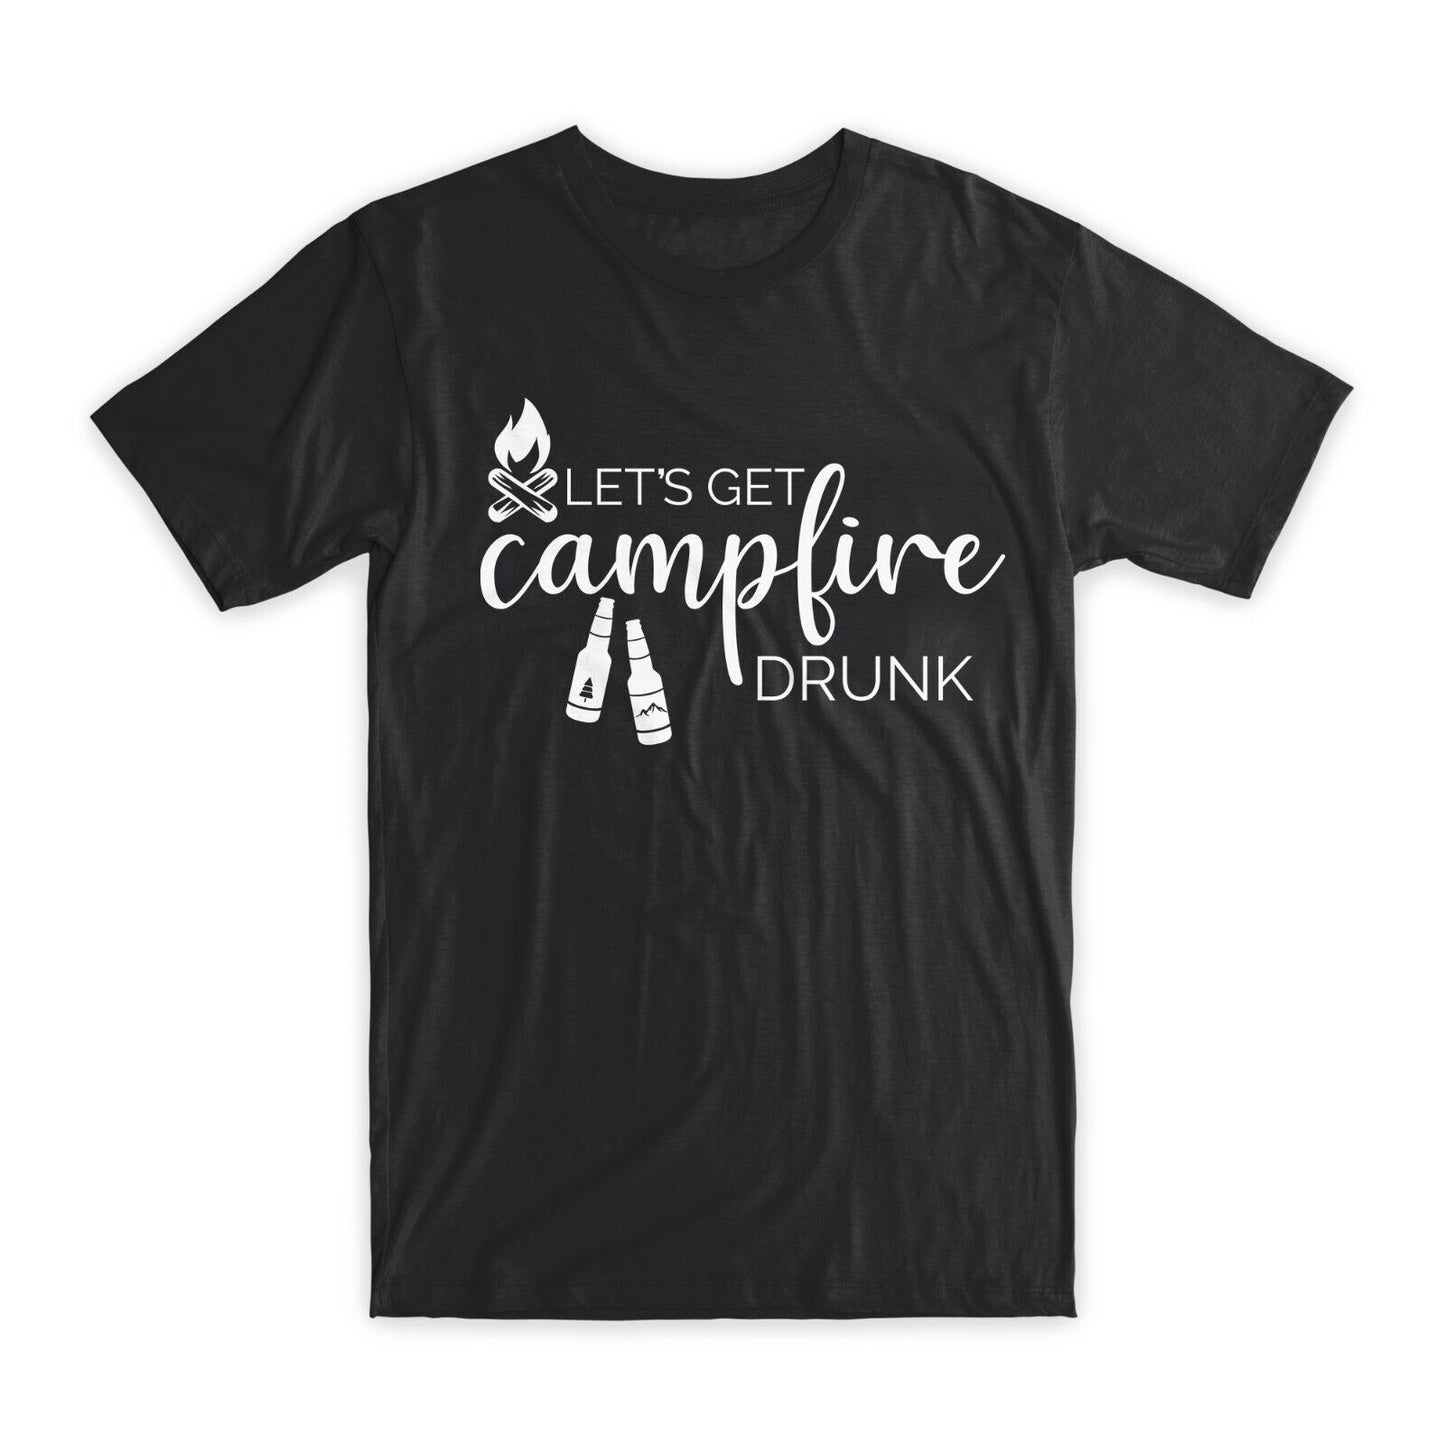 Let's Get Campfire Drunk T-Shirt Premium Soft Cotton Funny Tees Novelty Gift NEW